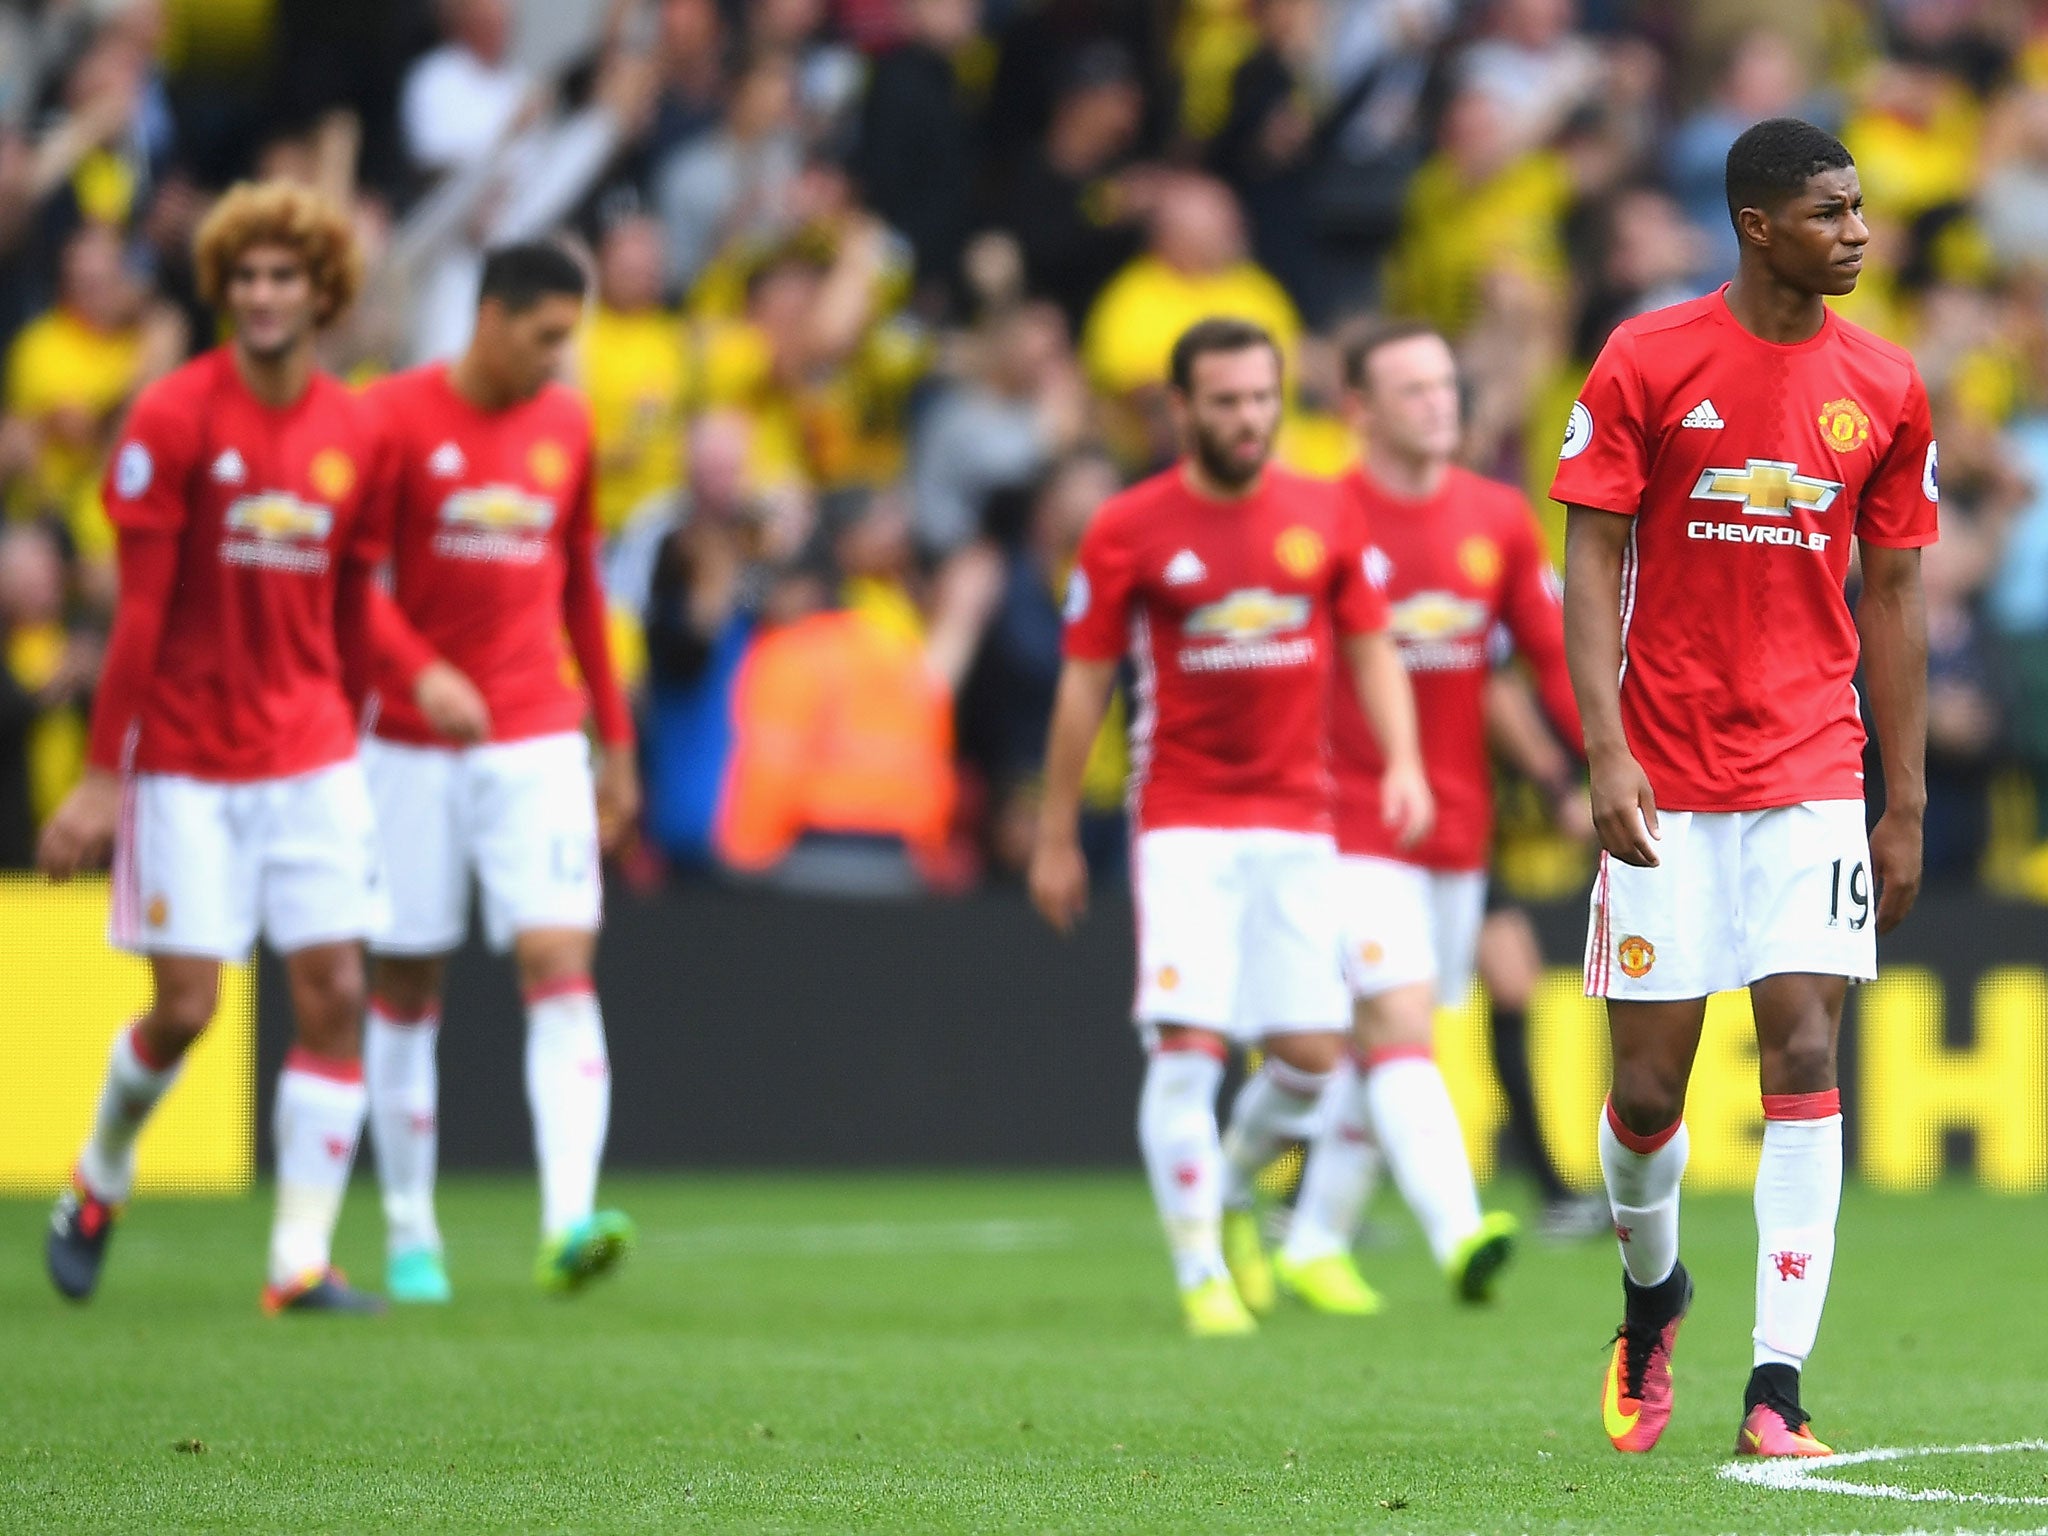 Manchester United are suffering from a recent dip in form